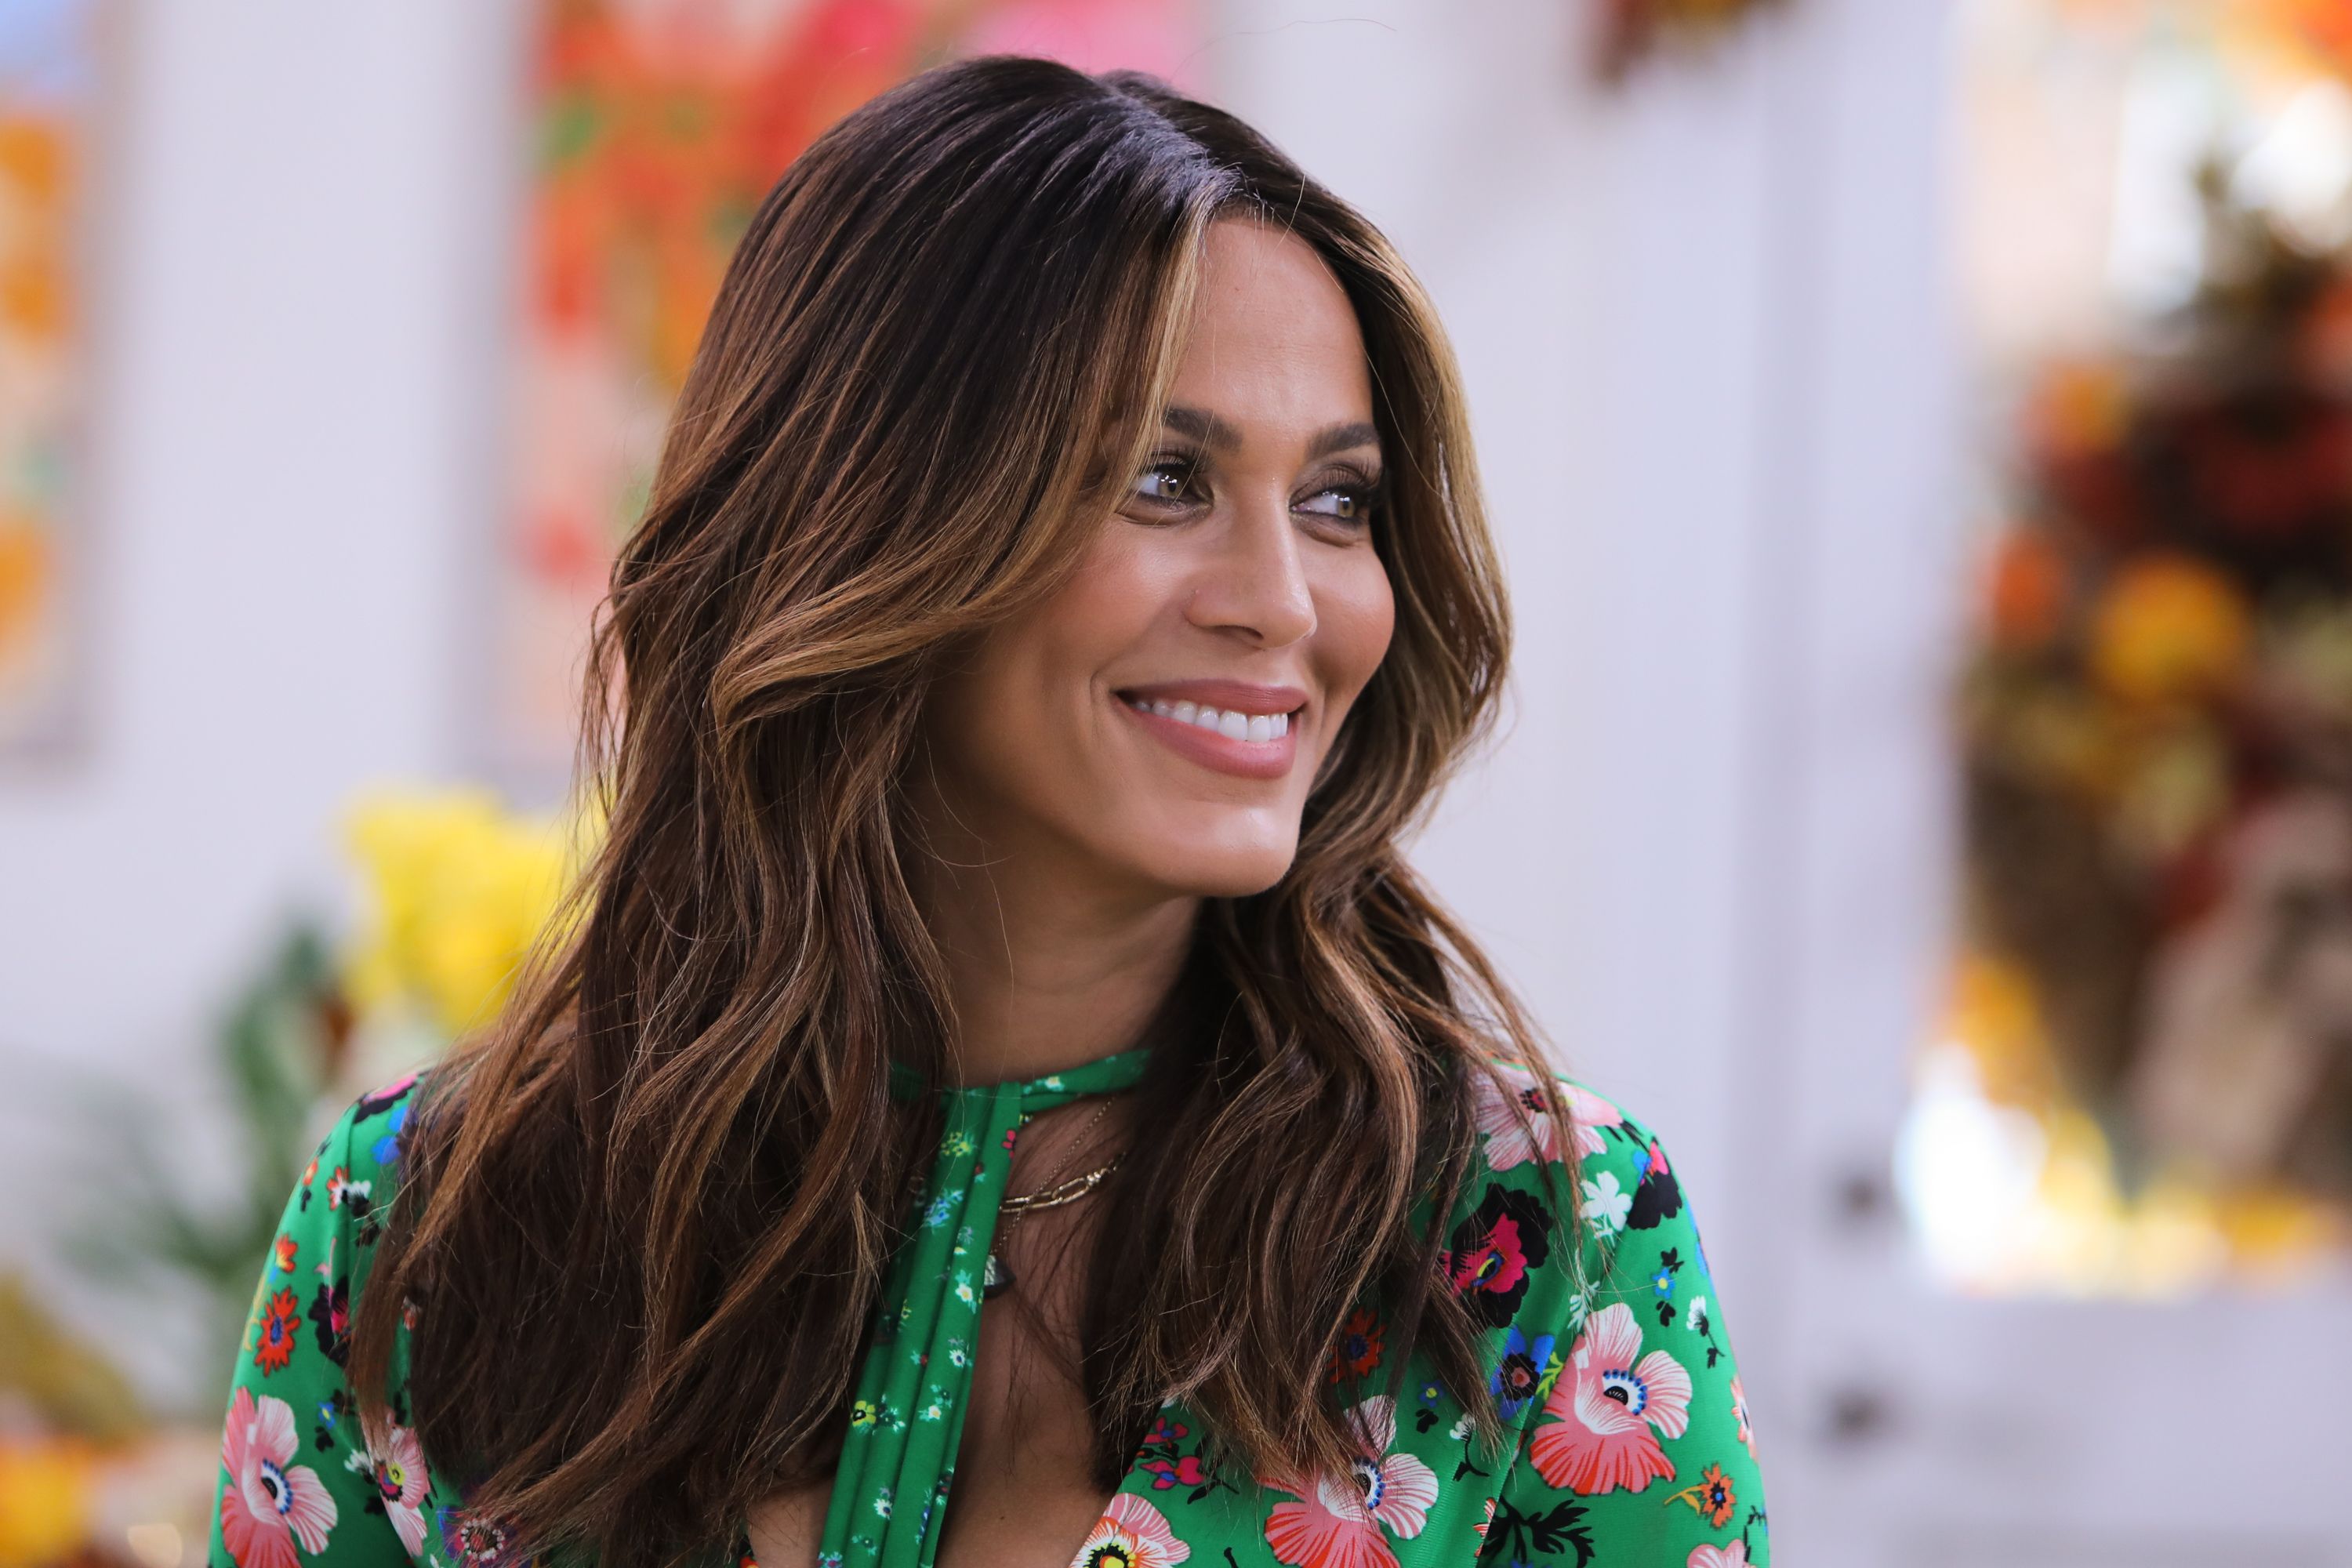 Actress Nicole Ari Parker at Hallmark's "Home & Family" at Universal Studios Hollywood on October 4, 2018 | Photo: Getty Images